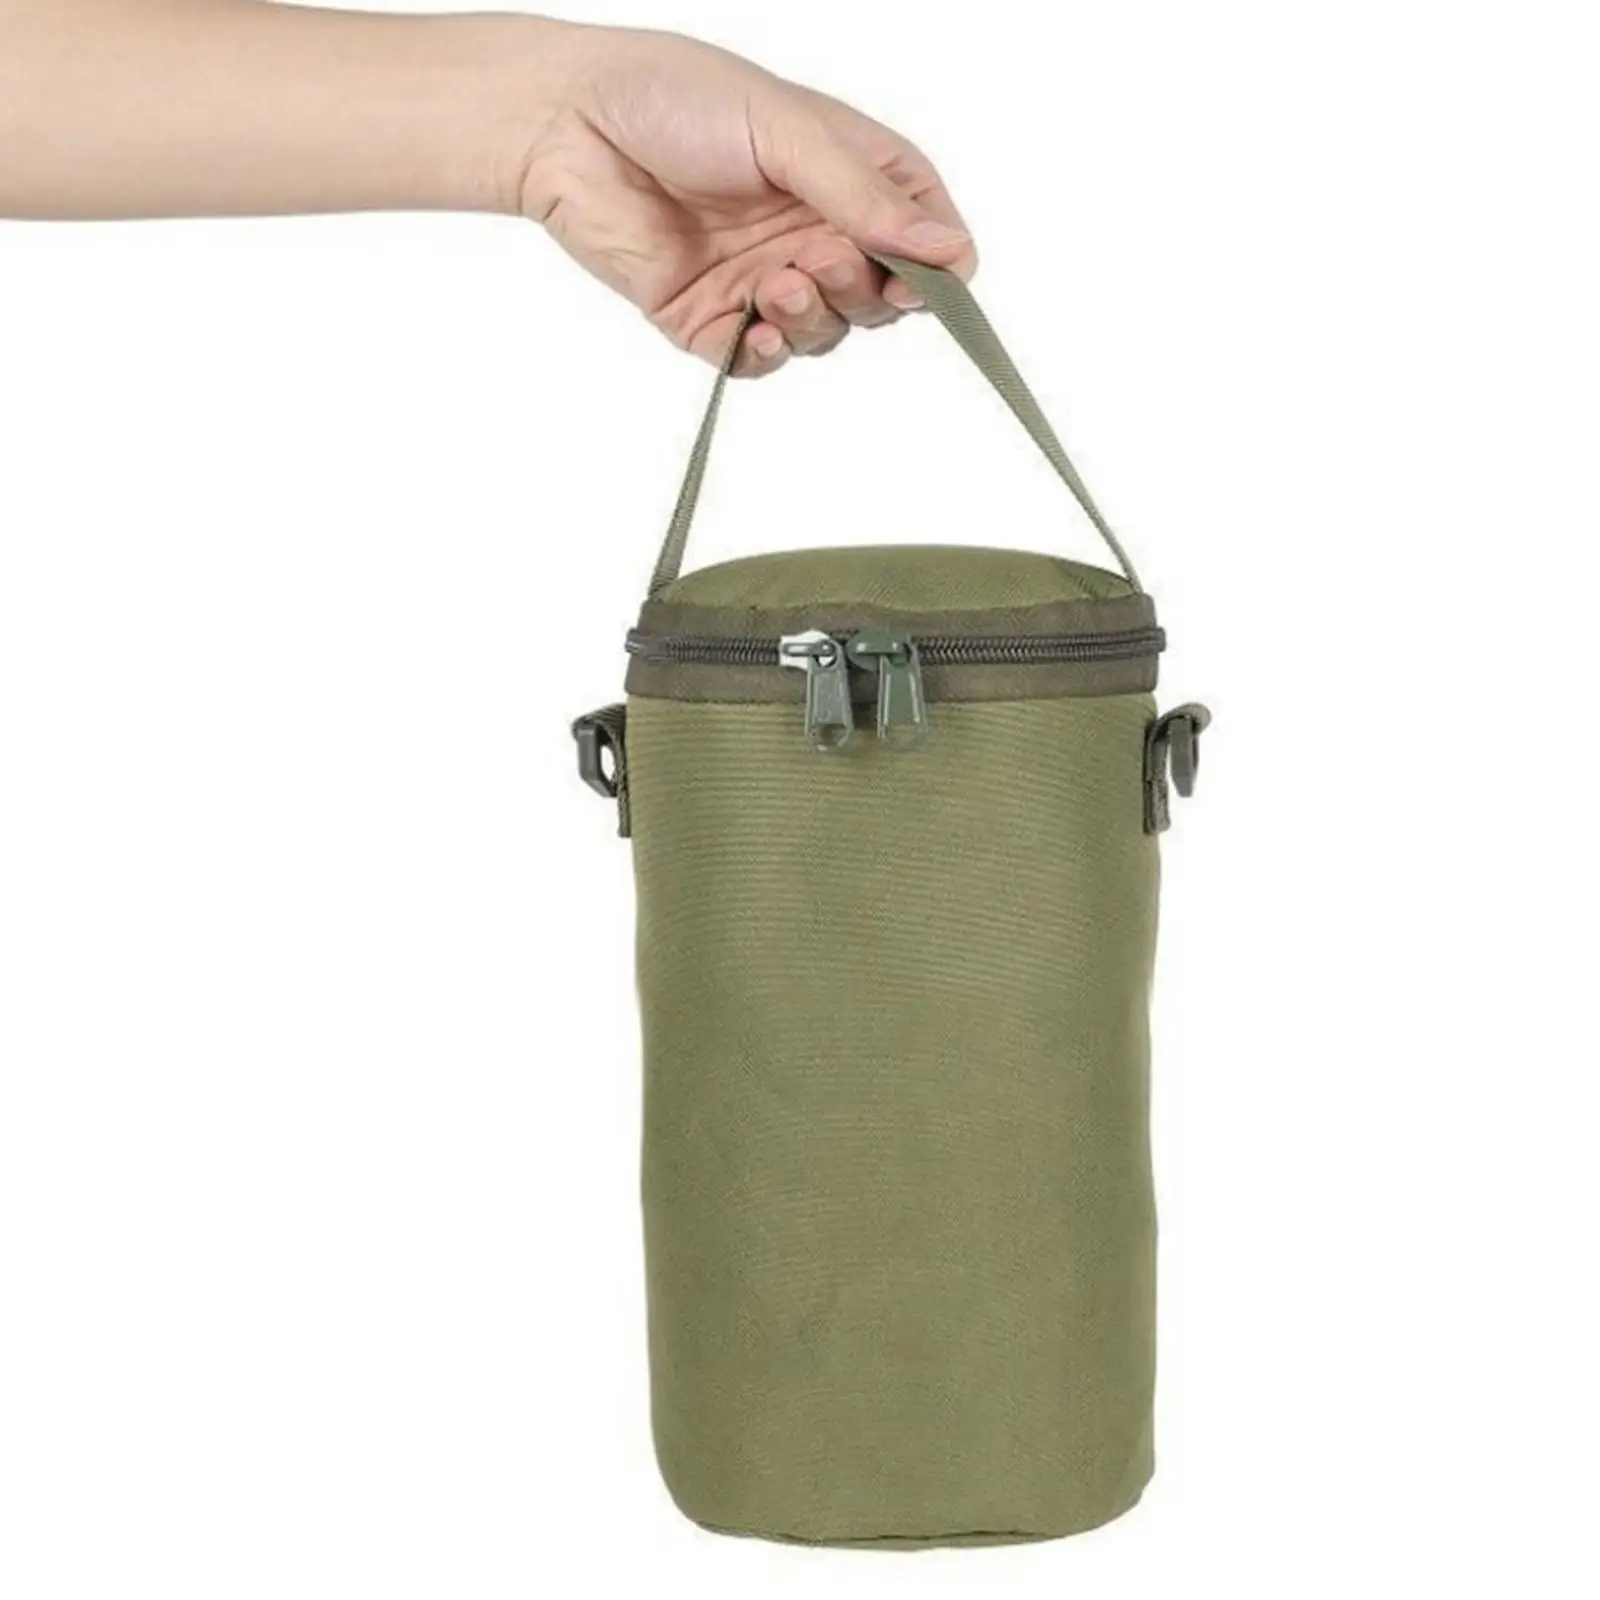 Durable Carry Bag Camping Lantern Gas Canister Cover Water Bottle Protector